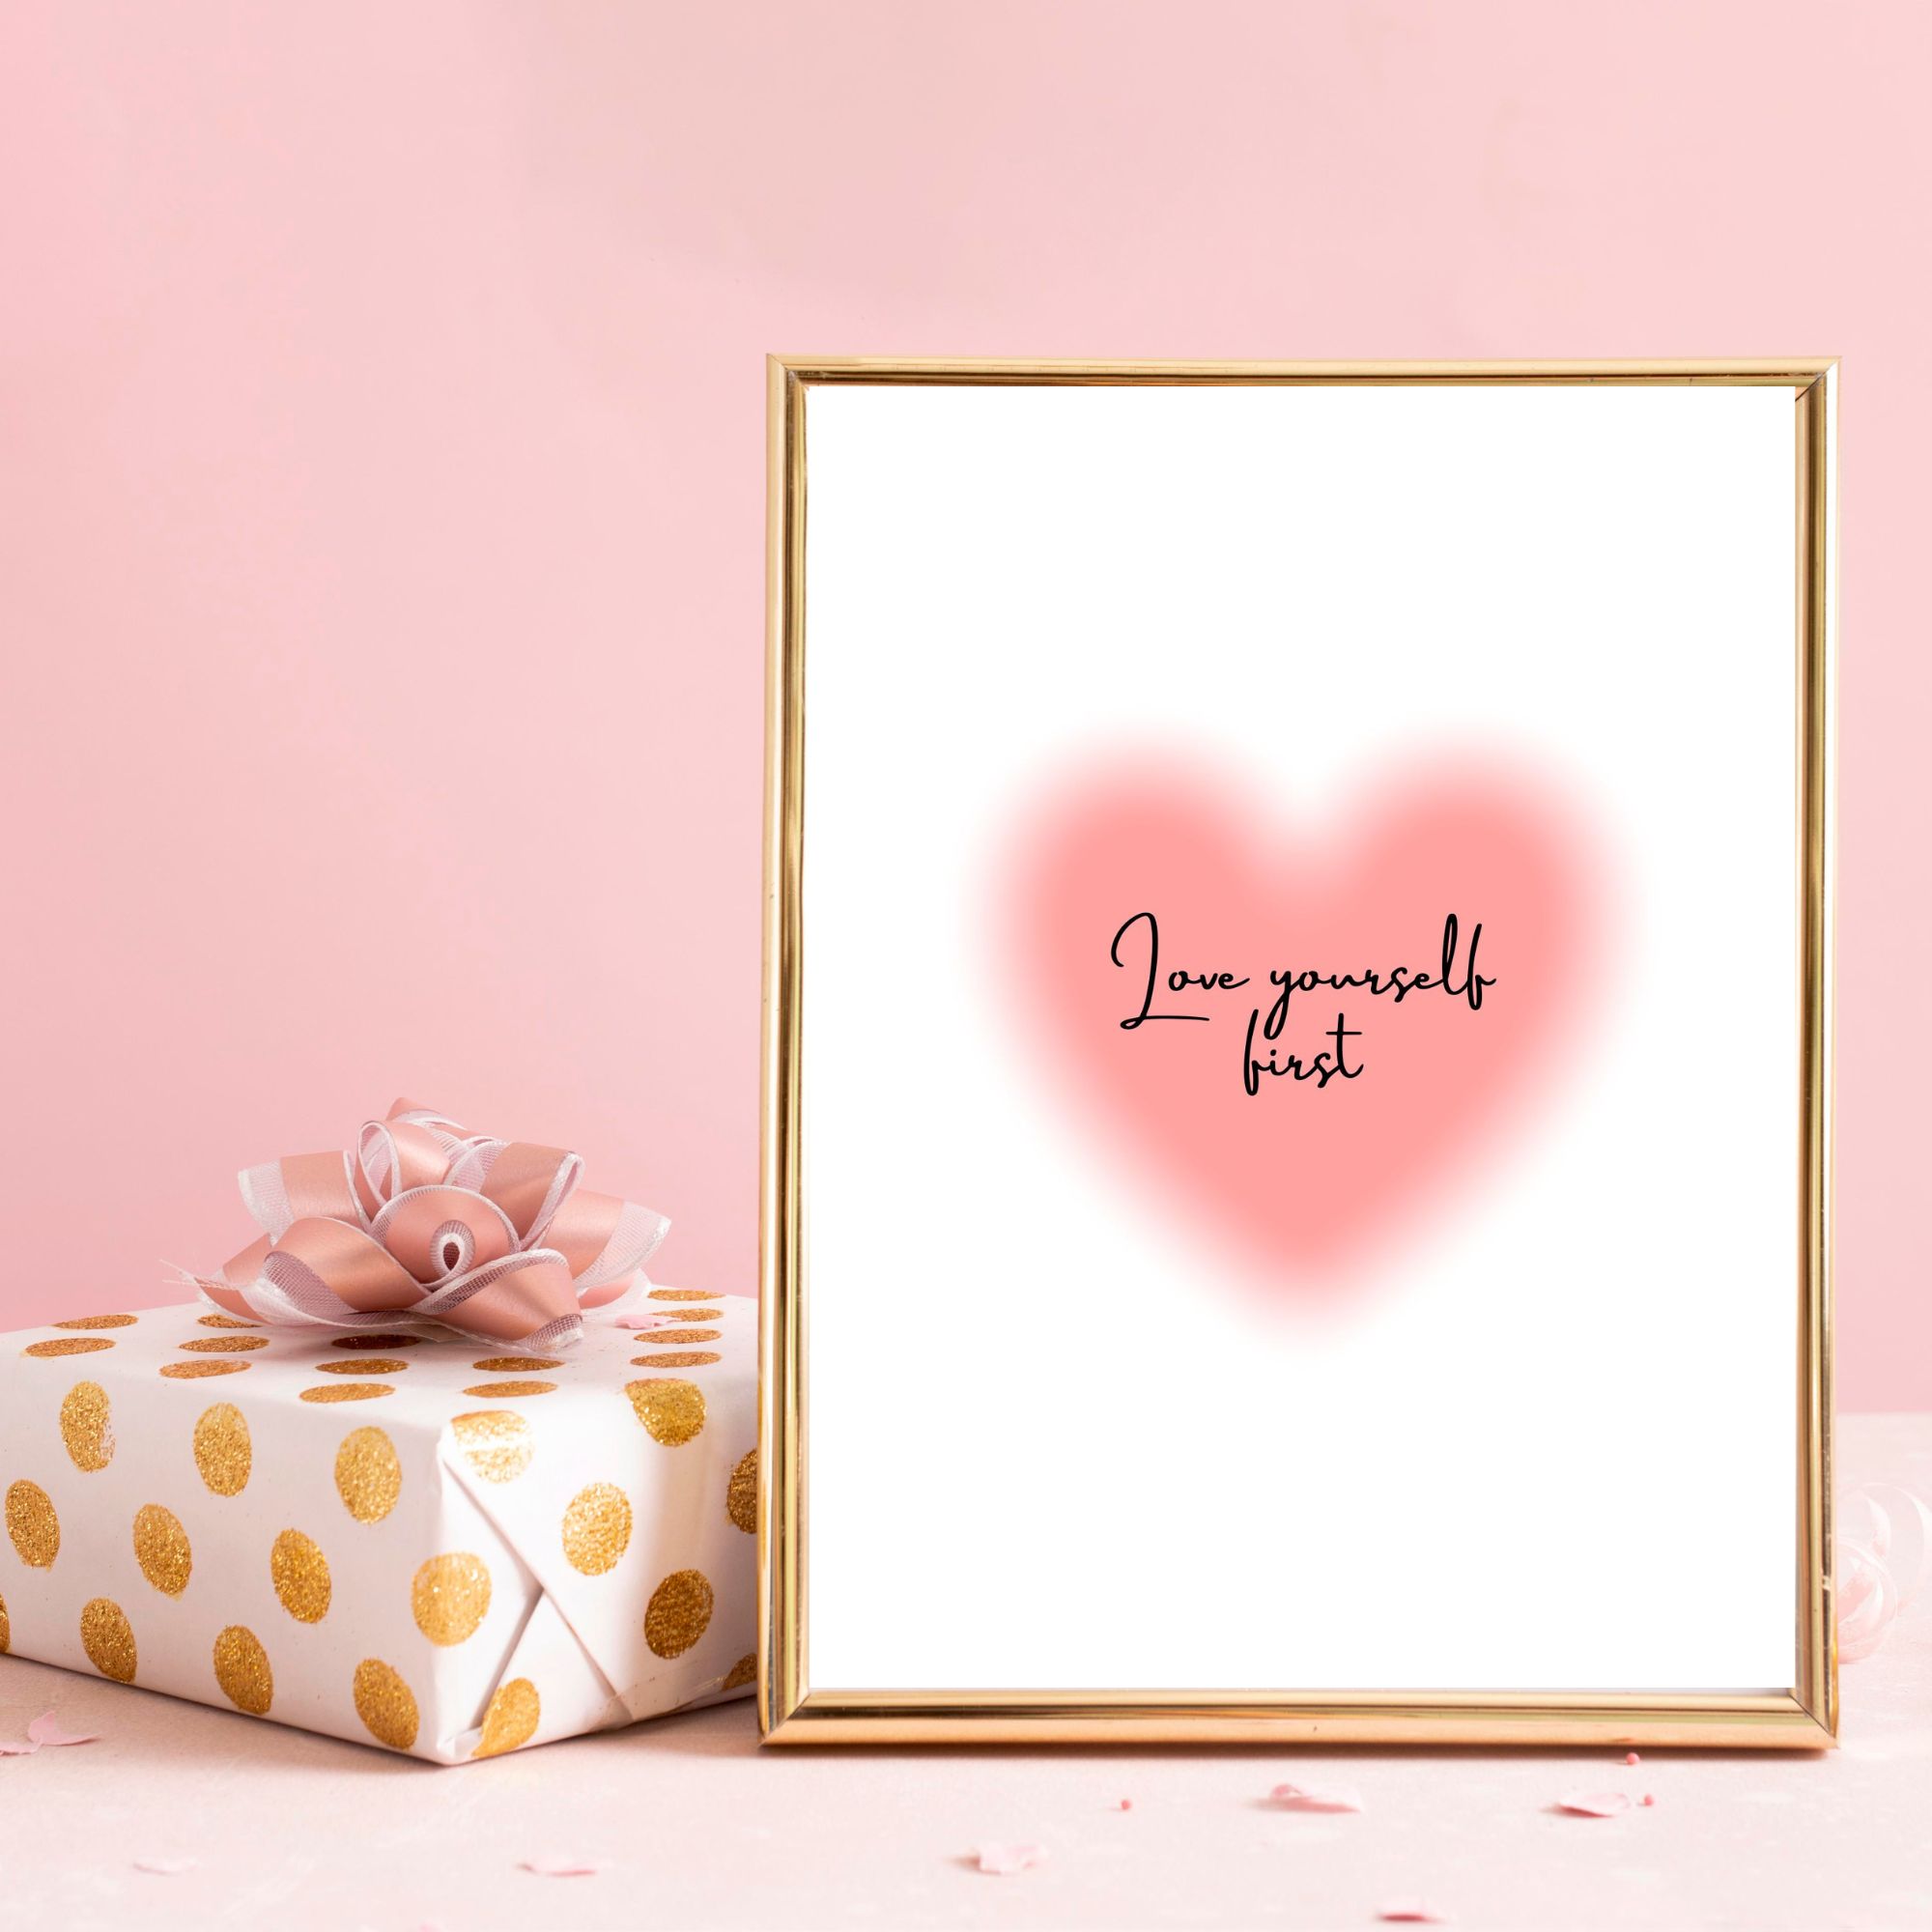 Love yourself first Printable, L O V E, Classic Love , Bedroom,Living Room,Home Decor, Digital DOWNLOAD Printable, Self love motivational preview image.